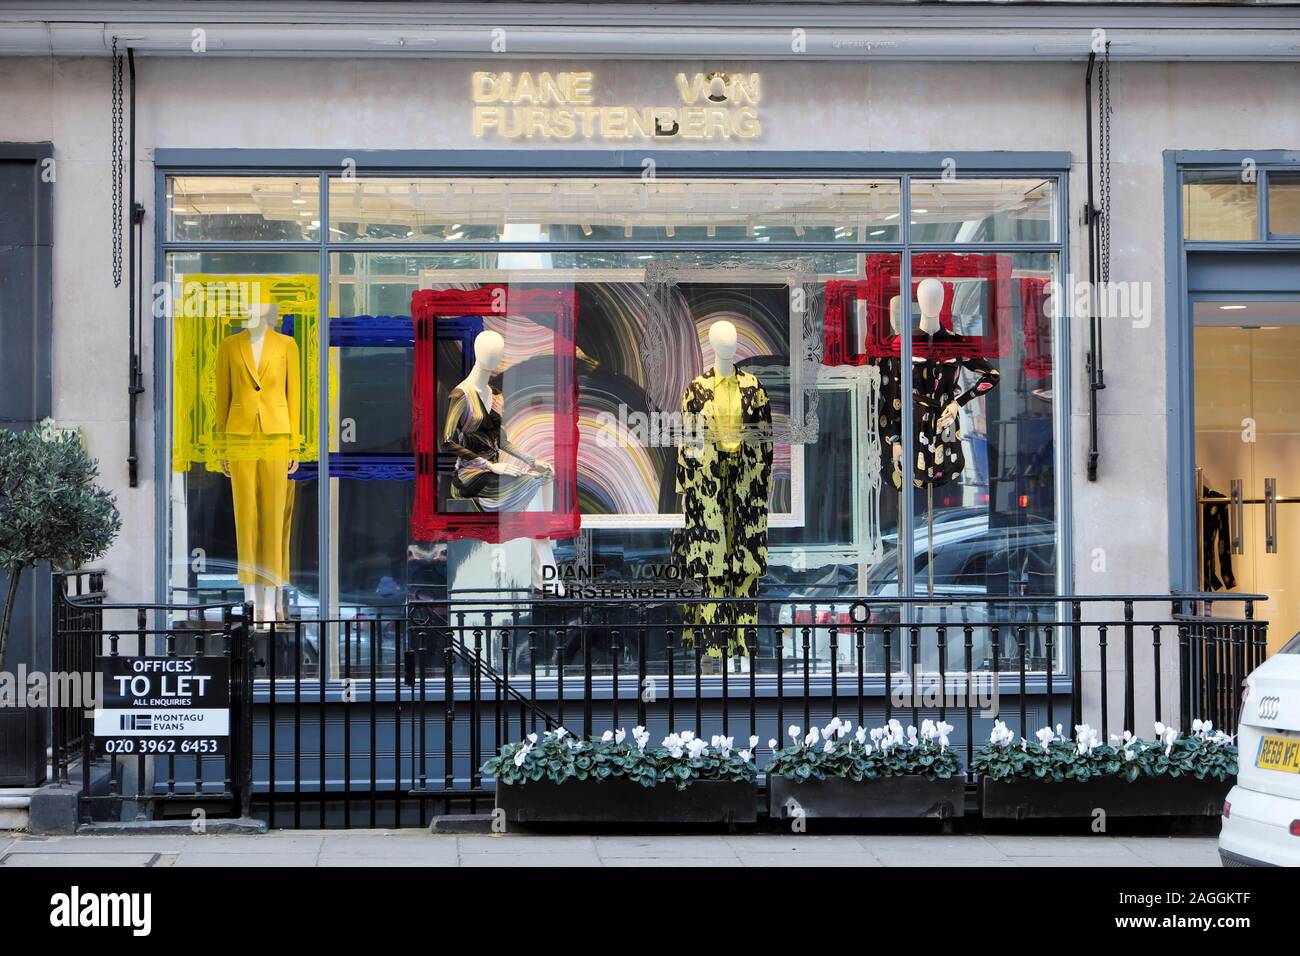 Exterior view of Diane von Furstenberg boutique shop and offices To Let sign on railing  in Mayfair London W1 England UK  KATHY DEWITT Stock Photo